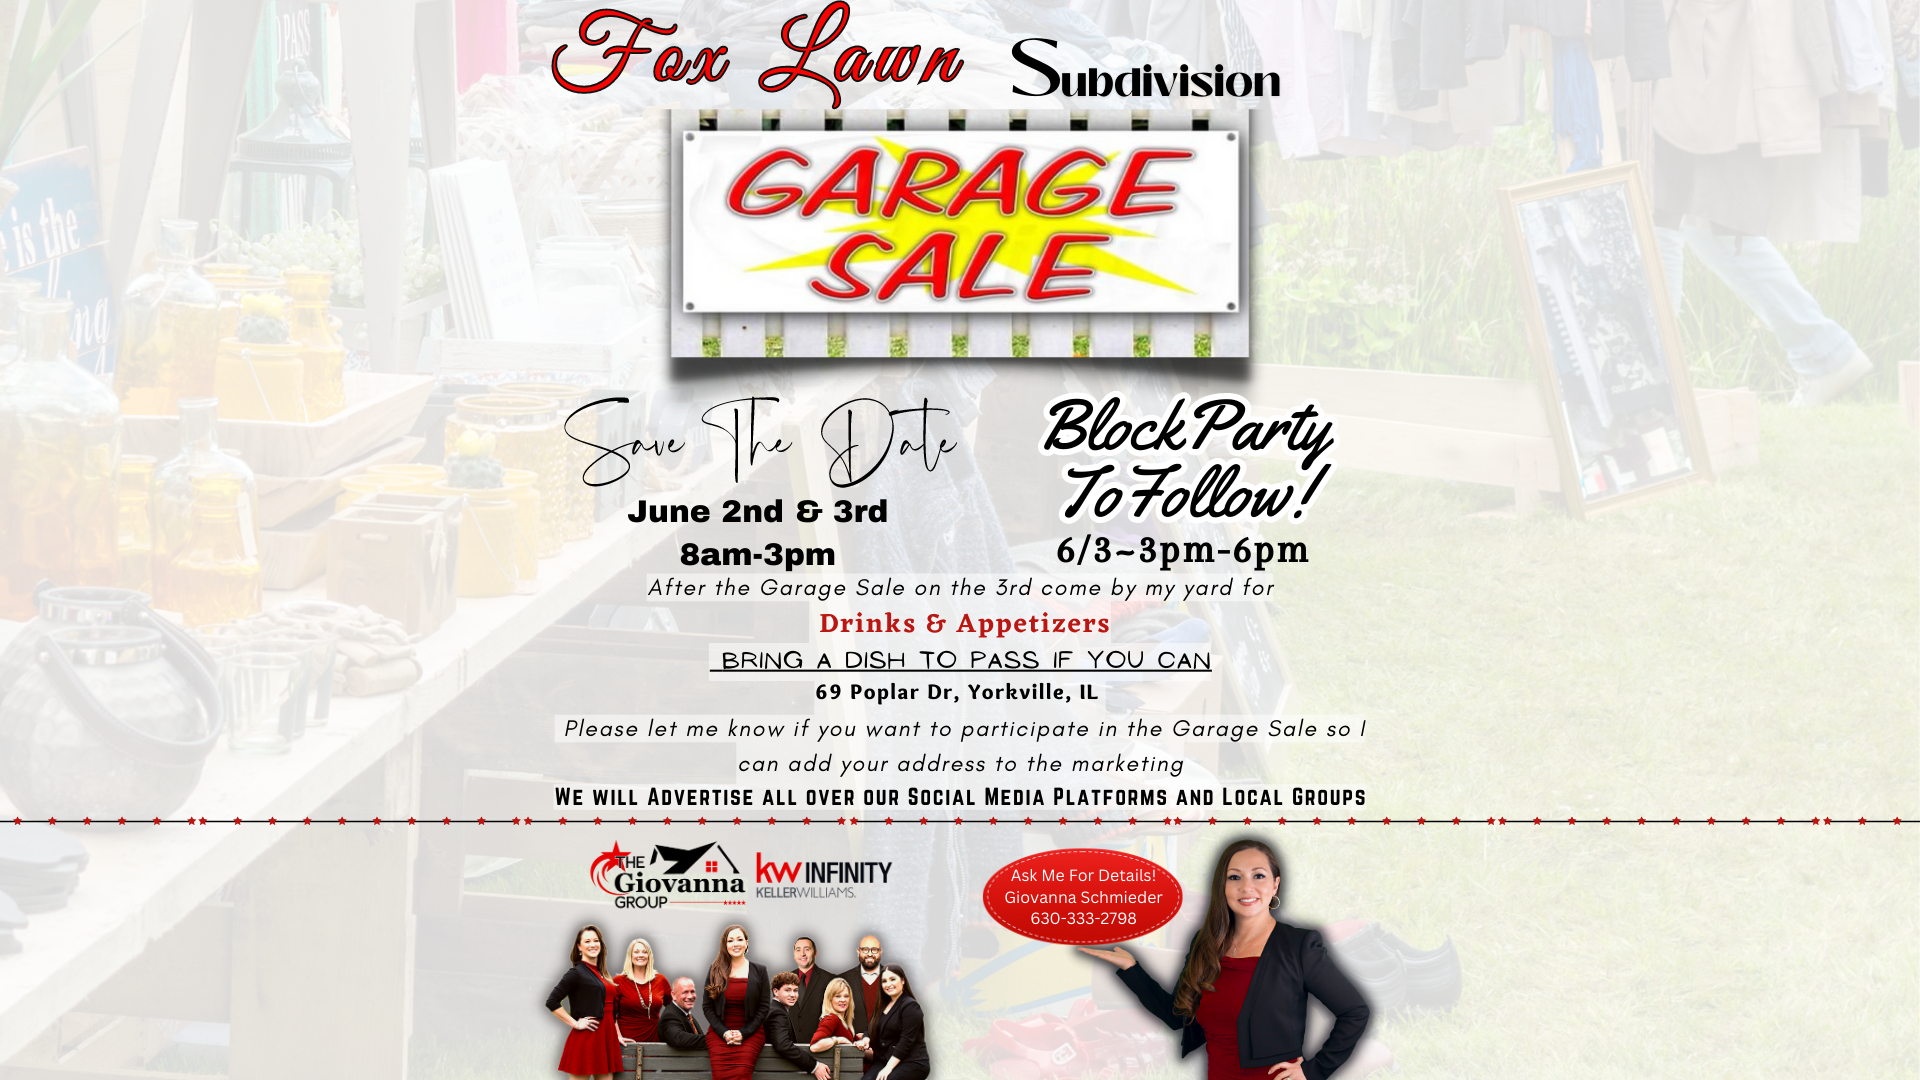 Get ready to discover hidden treasures, bargain deals, and unique items at our annual neighborhood event. Bring your family, friends, and neighbors to experience a fantastic day of shopping and socializing. Date: Friday, June 2-and Saturday, June 3rd Time: 8:00 am - 3:00 pm Location: Fox Lawn Subdivision Block Party to Follow! We hope to see you there!